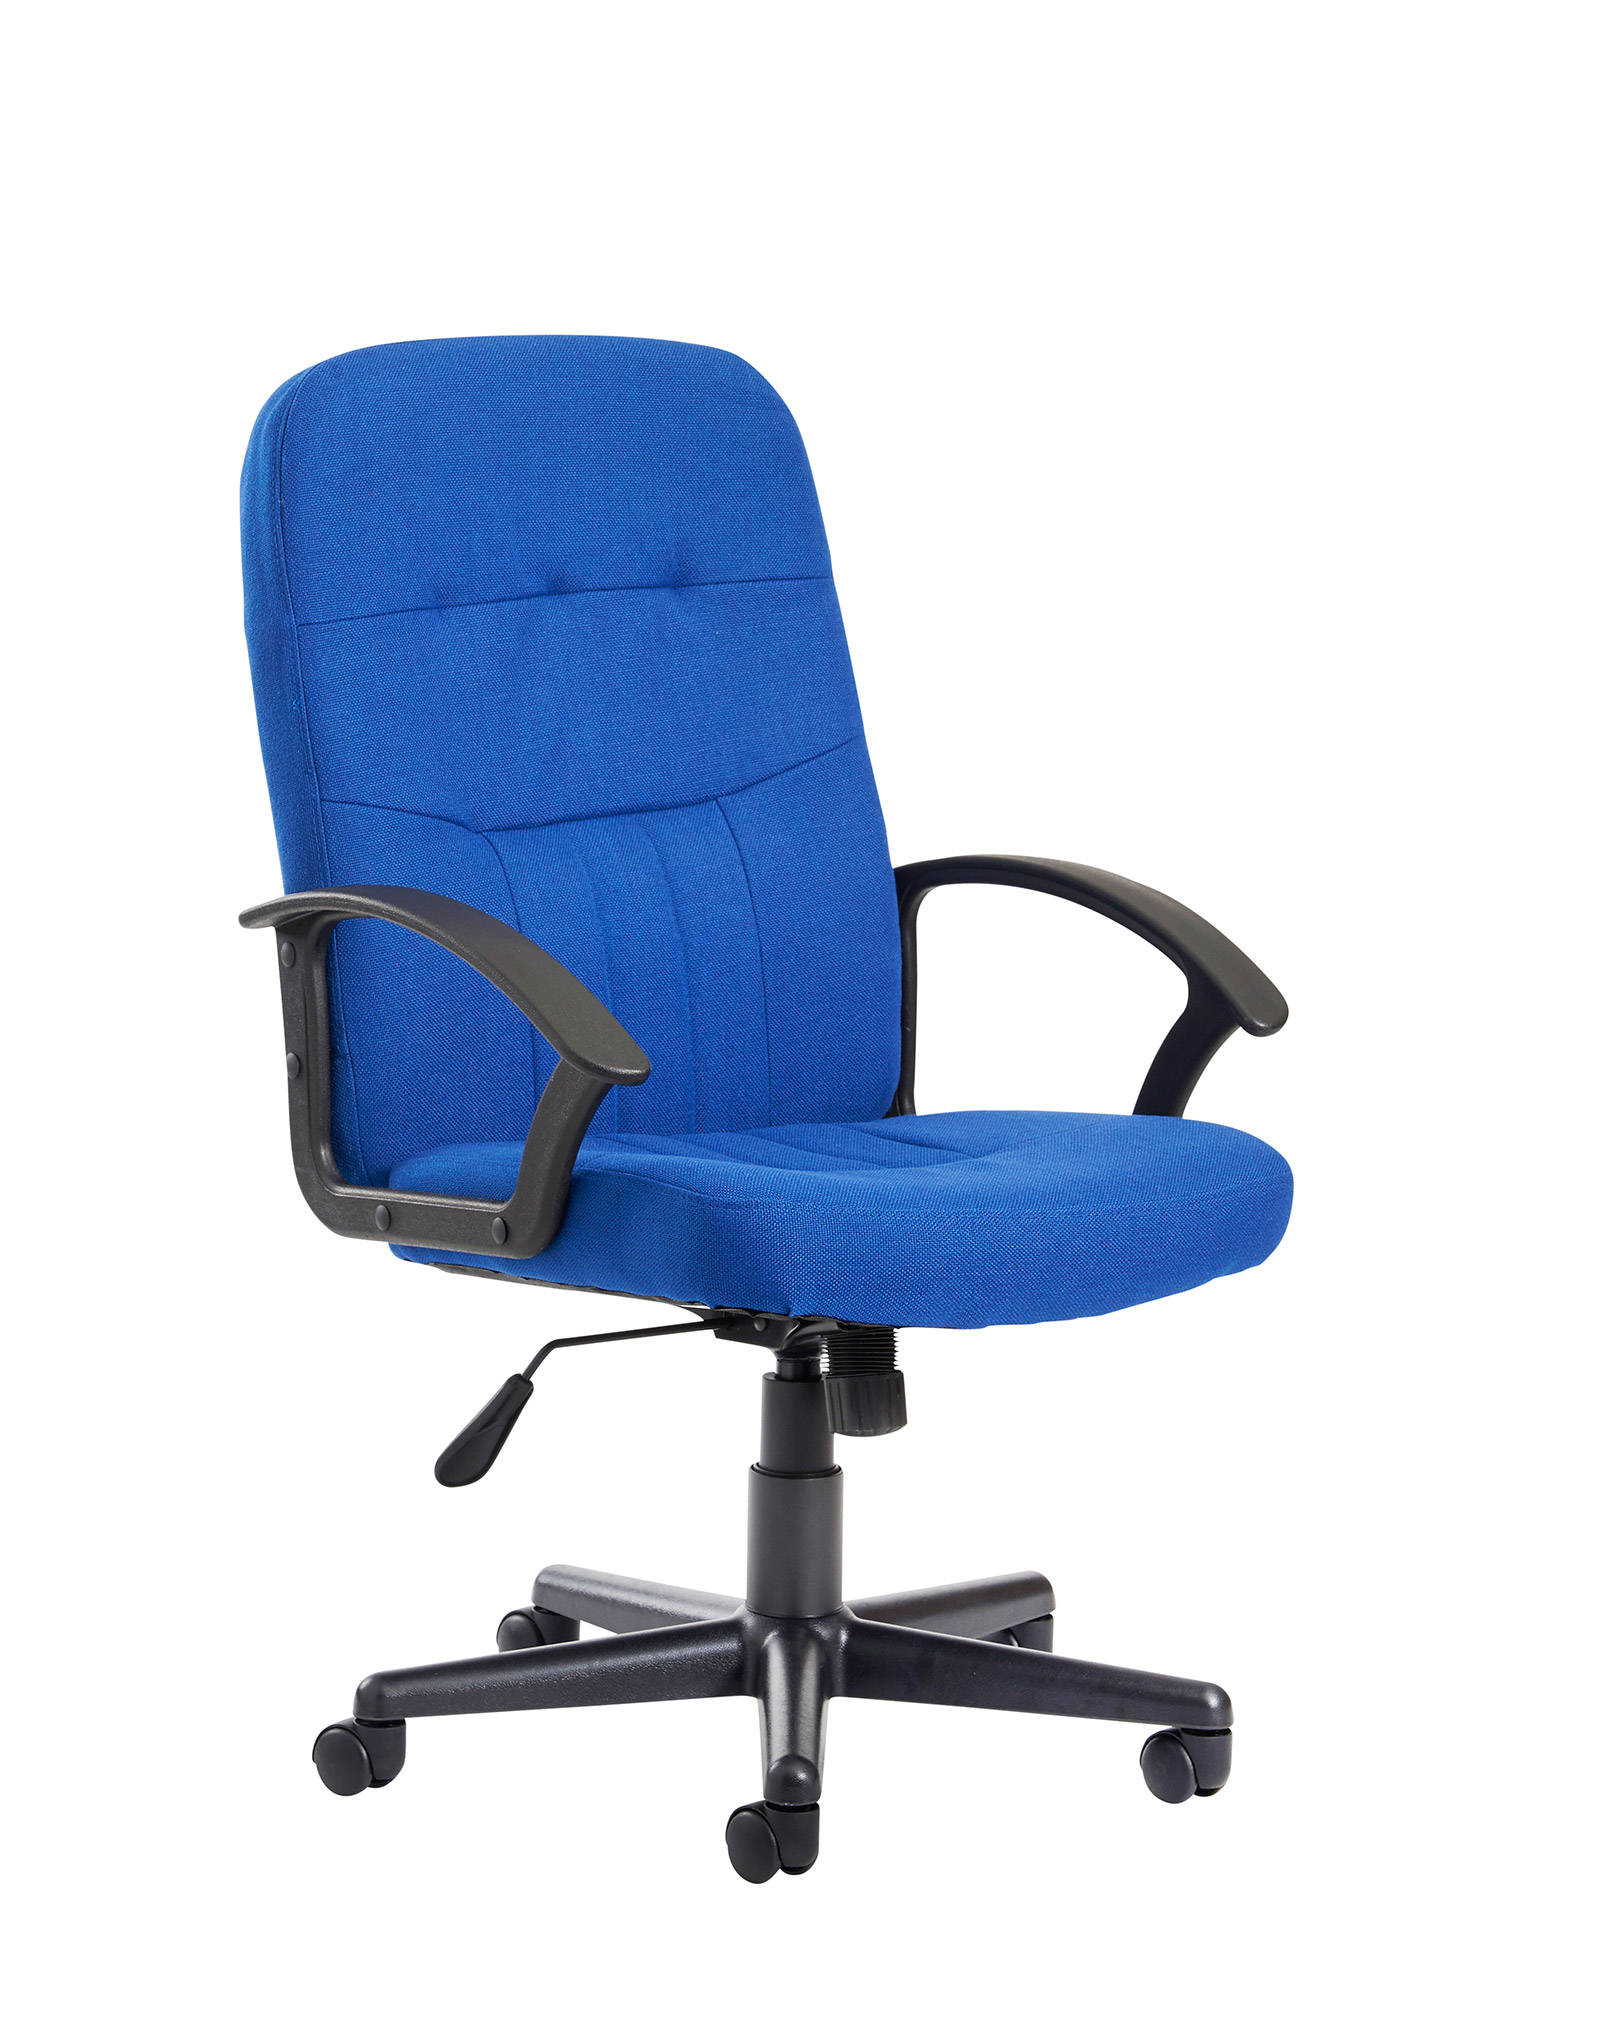 Cavalier fabric managers chair